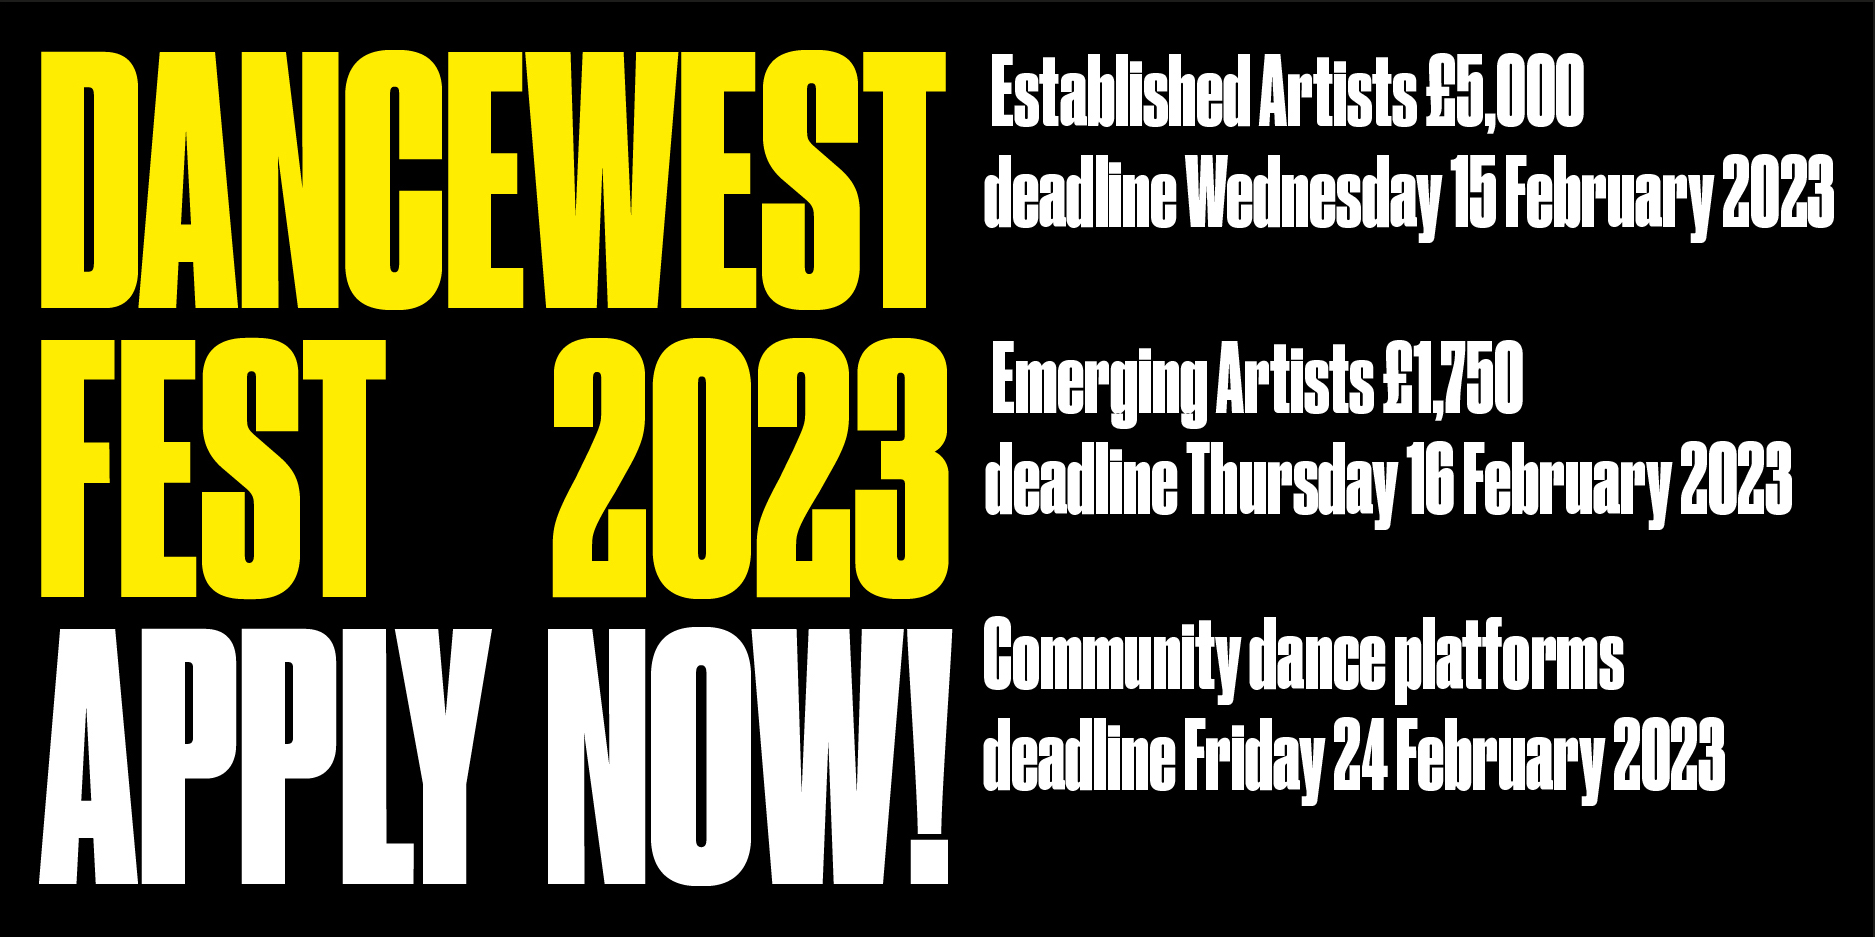 Applications for DanceWest Fest 23 are now open!  Please visit the website for more information